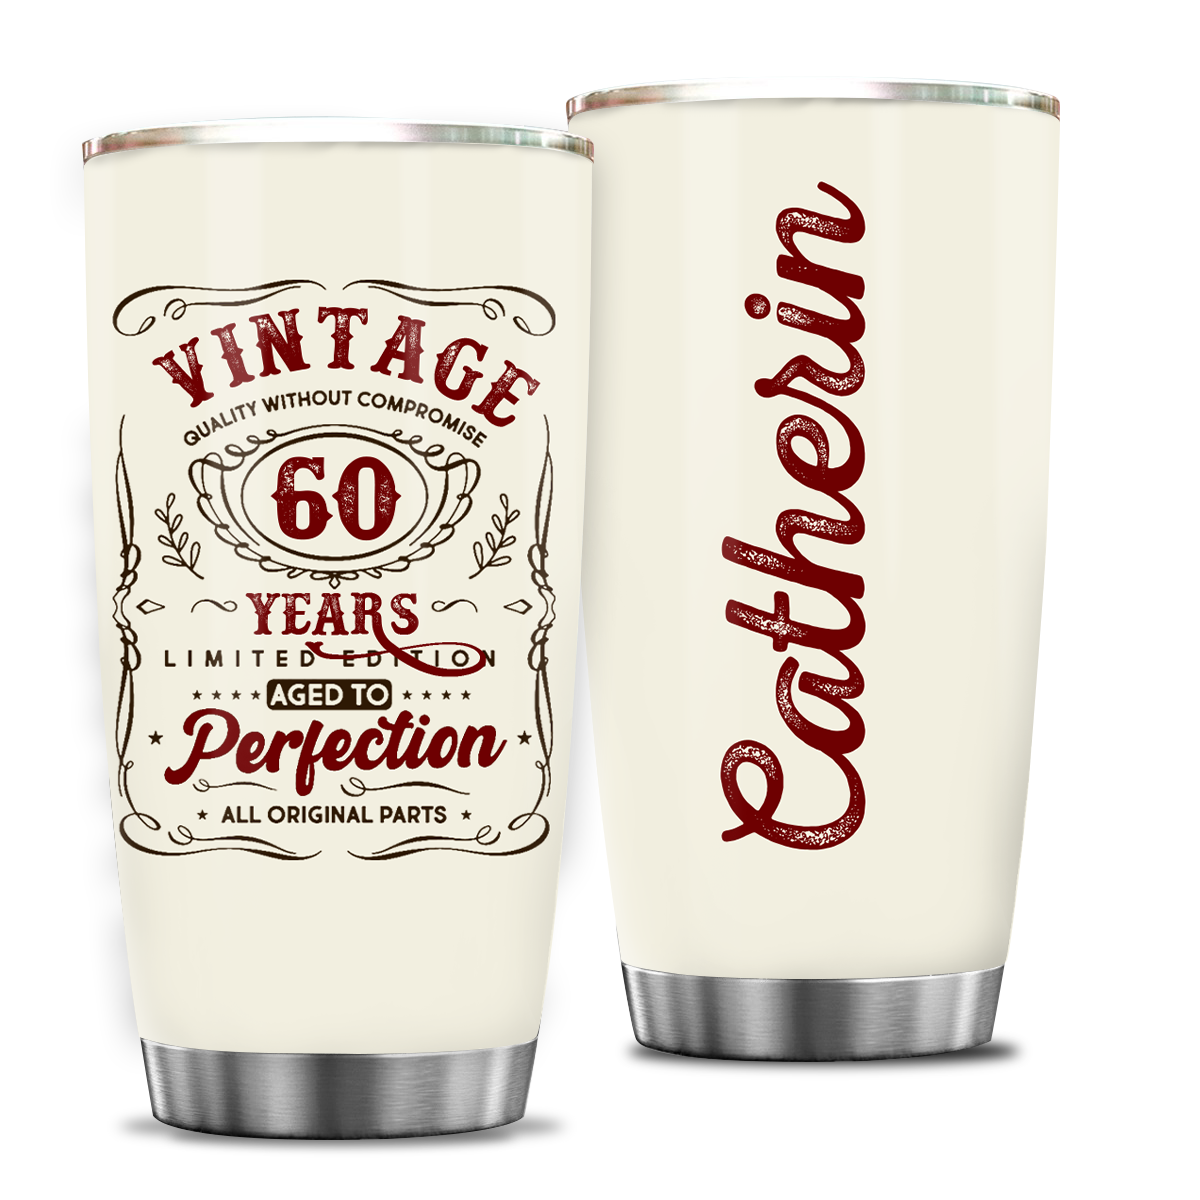 Vintage Wine Label 60th Birthday Vintage 60 Years Aged To Perfection Limited Edition Custom Gifts Men Women Stainless Steel Tumbler - Personalized Stainless Steel Tumbler